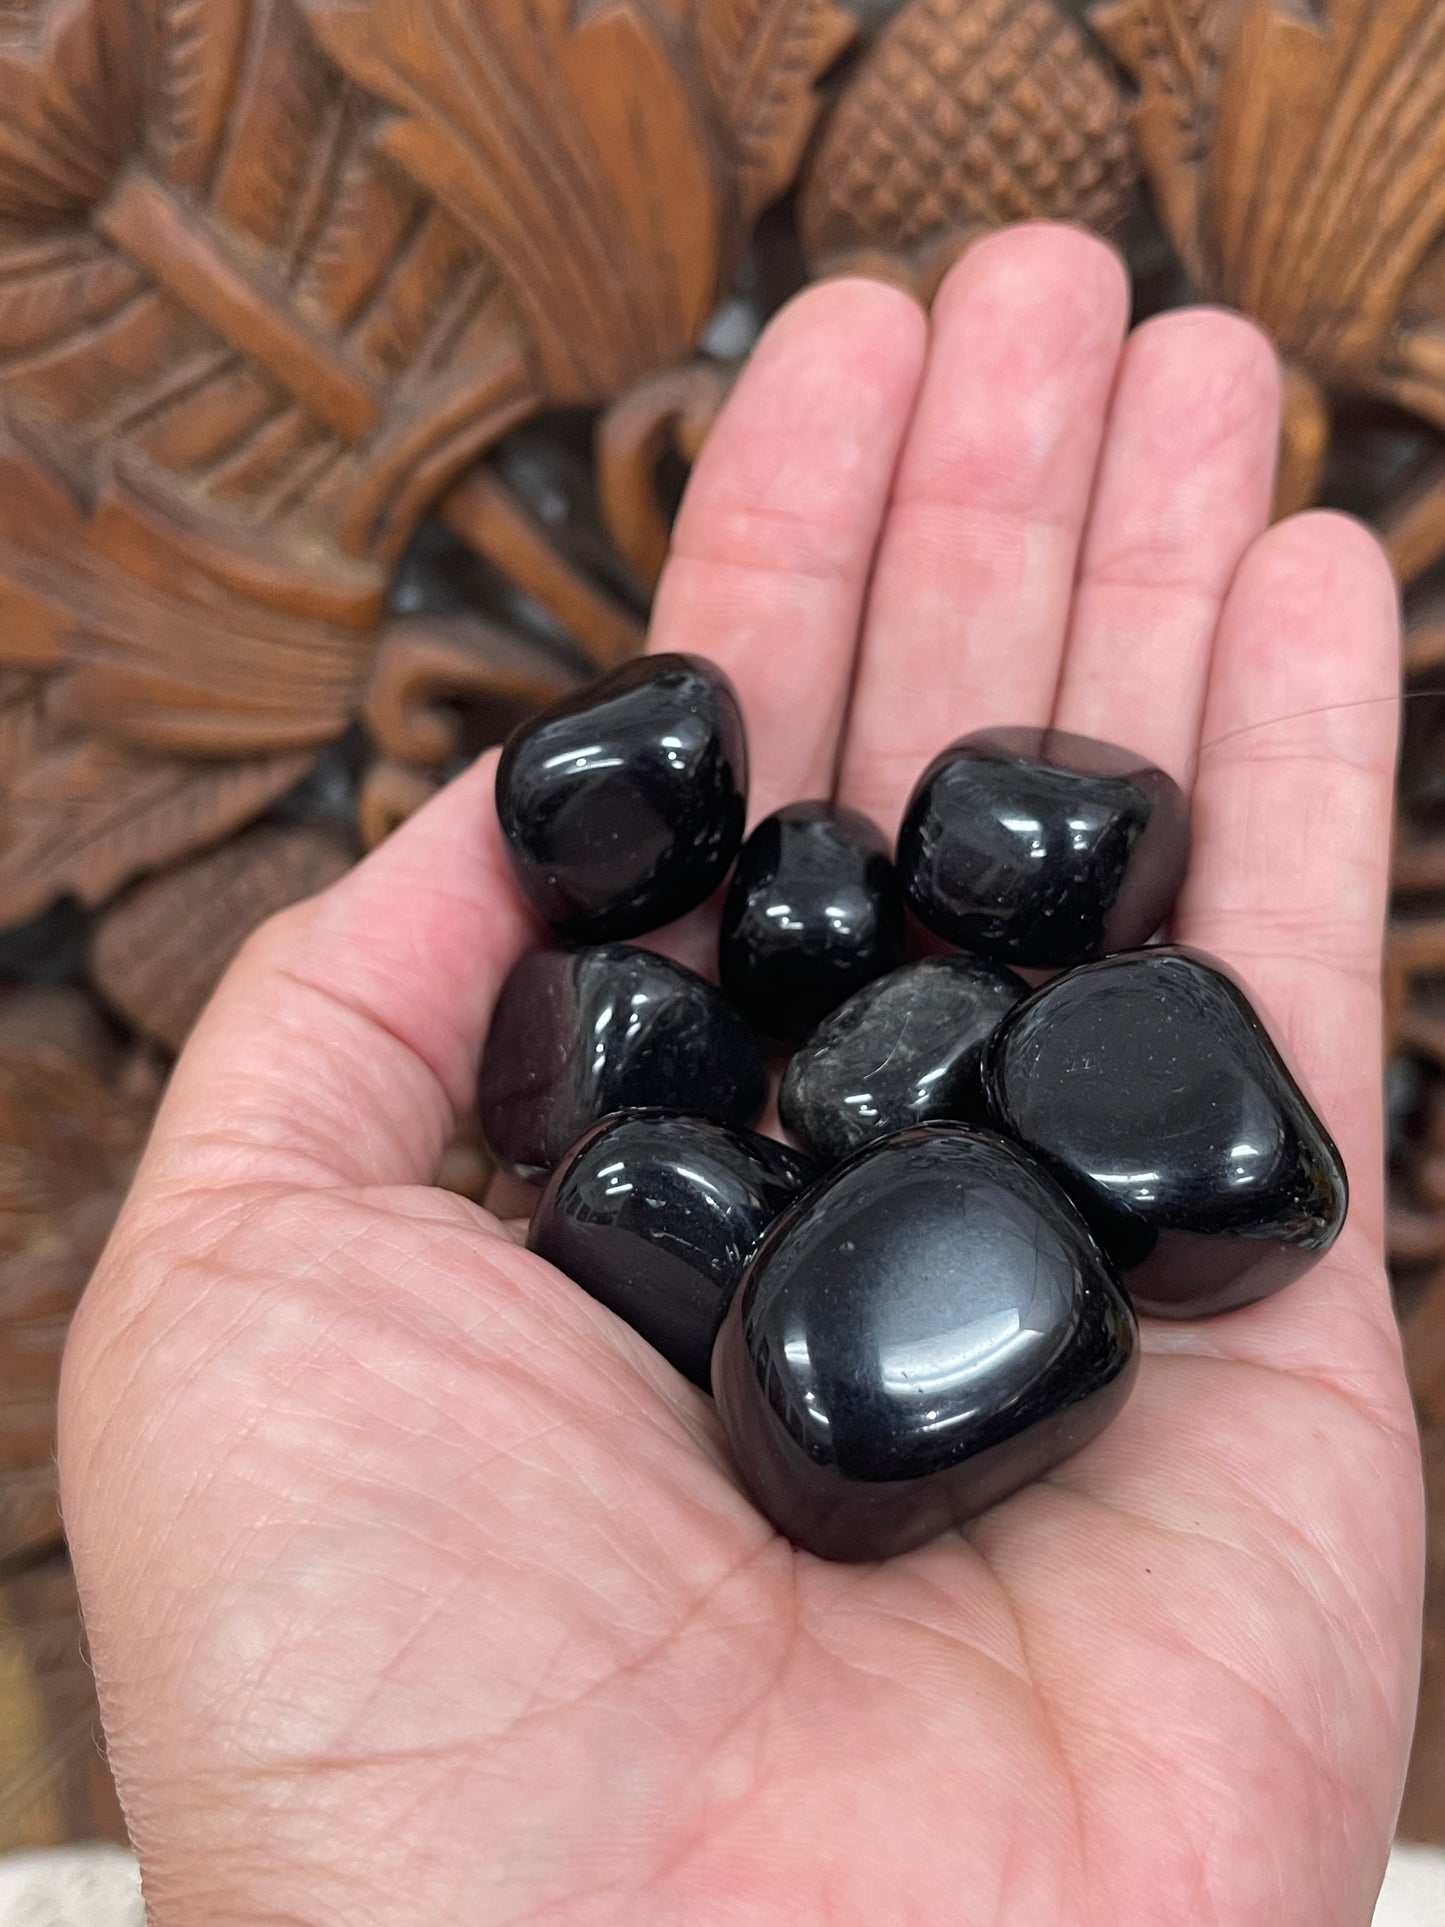 Black Obsidian Tumbled Stones from Mexico - 2 sizes